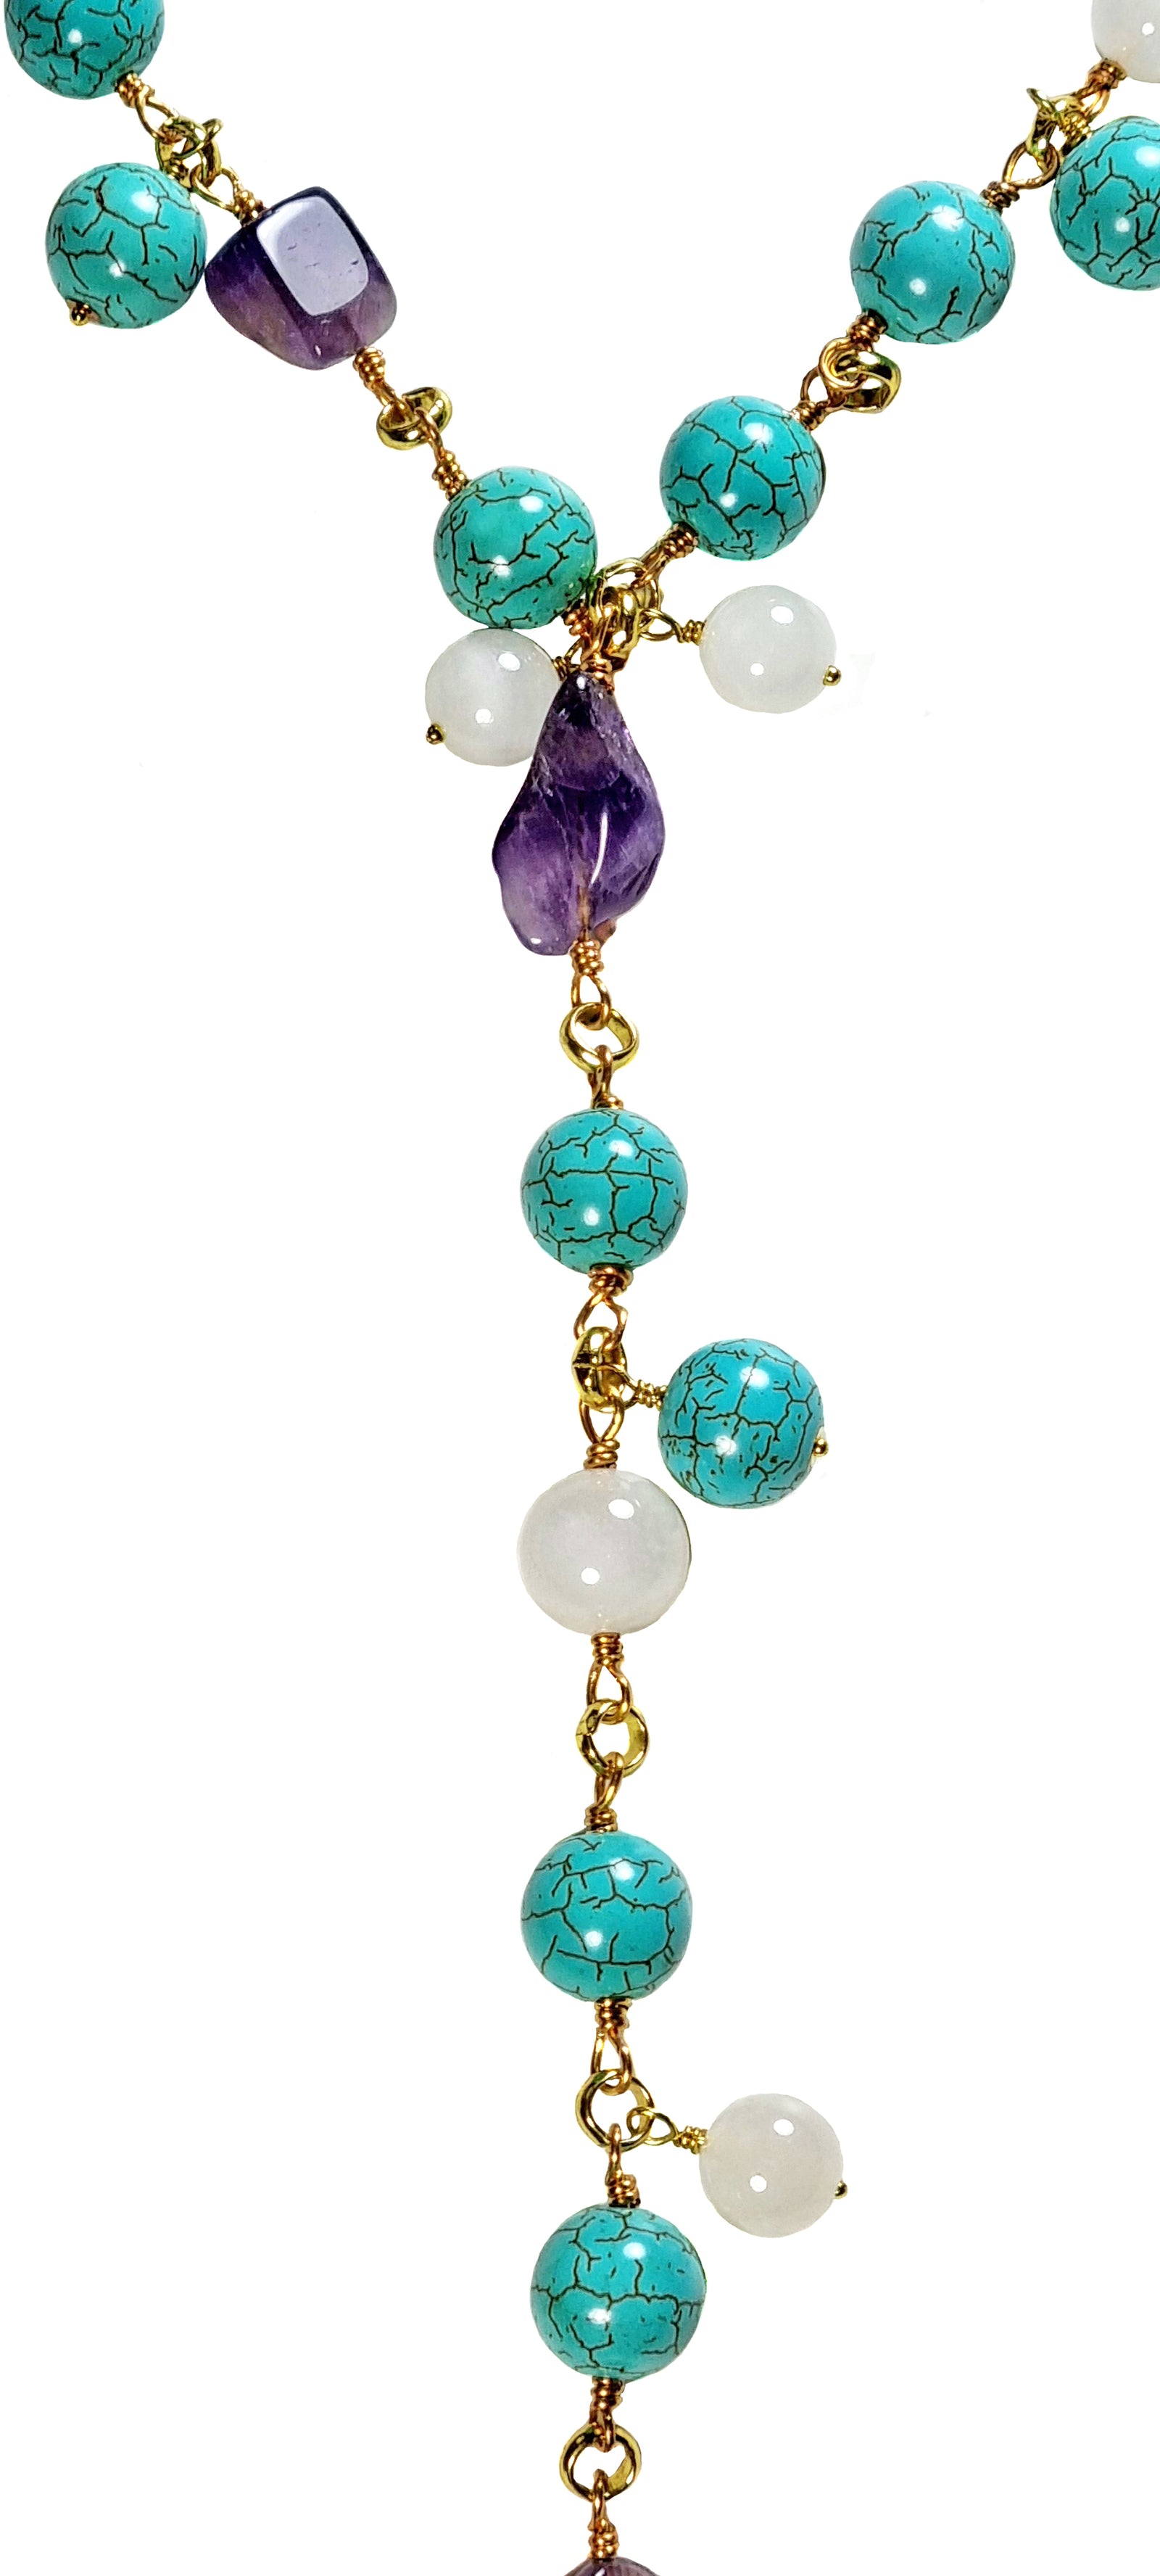 MARKELLA Turquoise and Amethyst Y Necklace